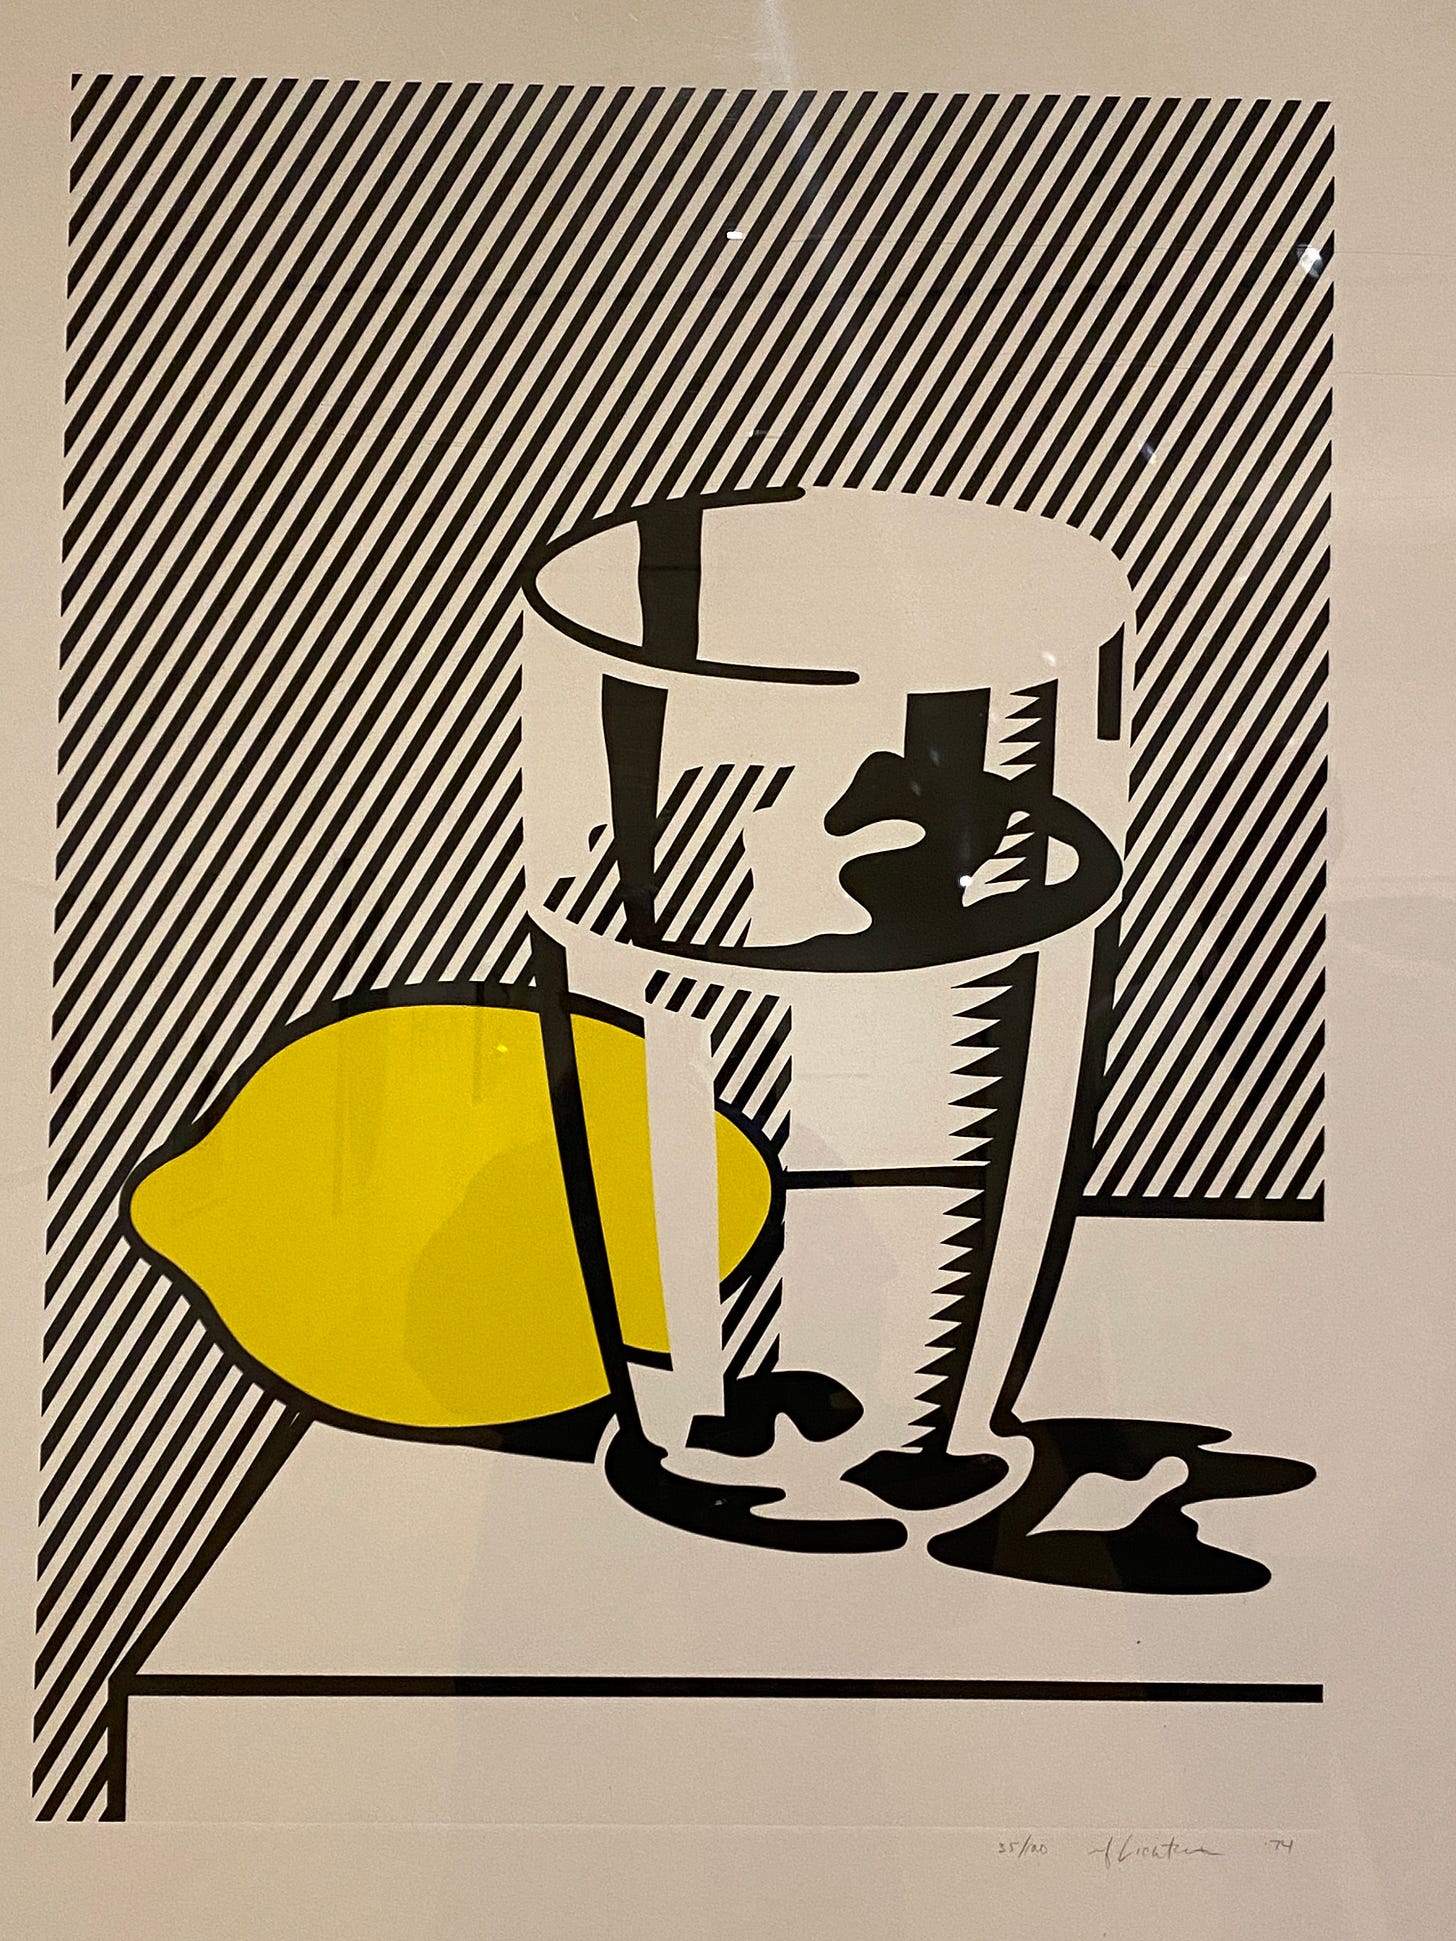 A graphical image with a class with liquid next to a yellow lemon with a black and white slanted line background.